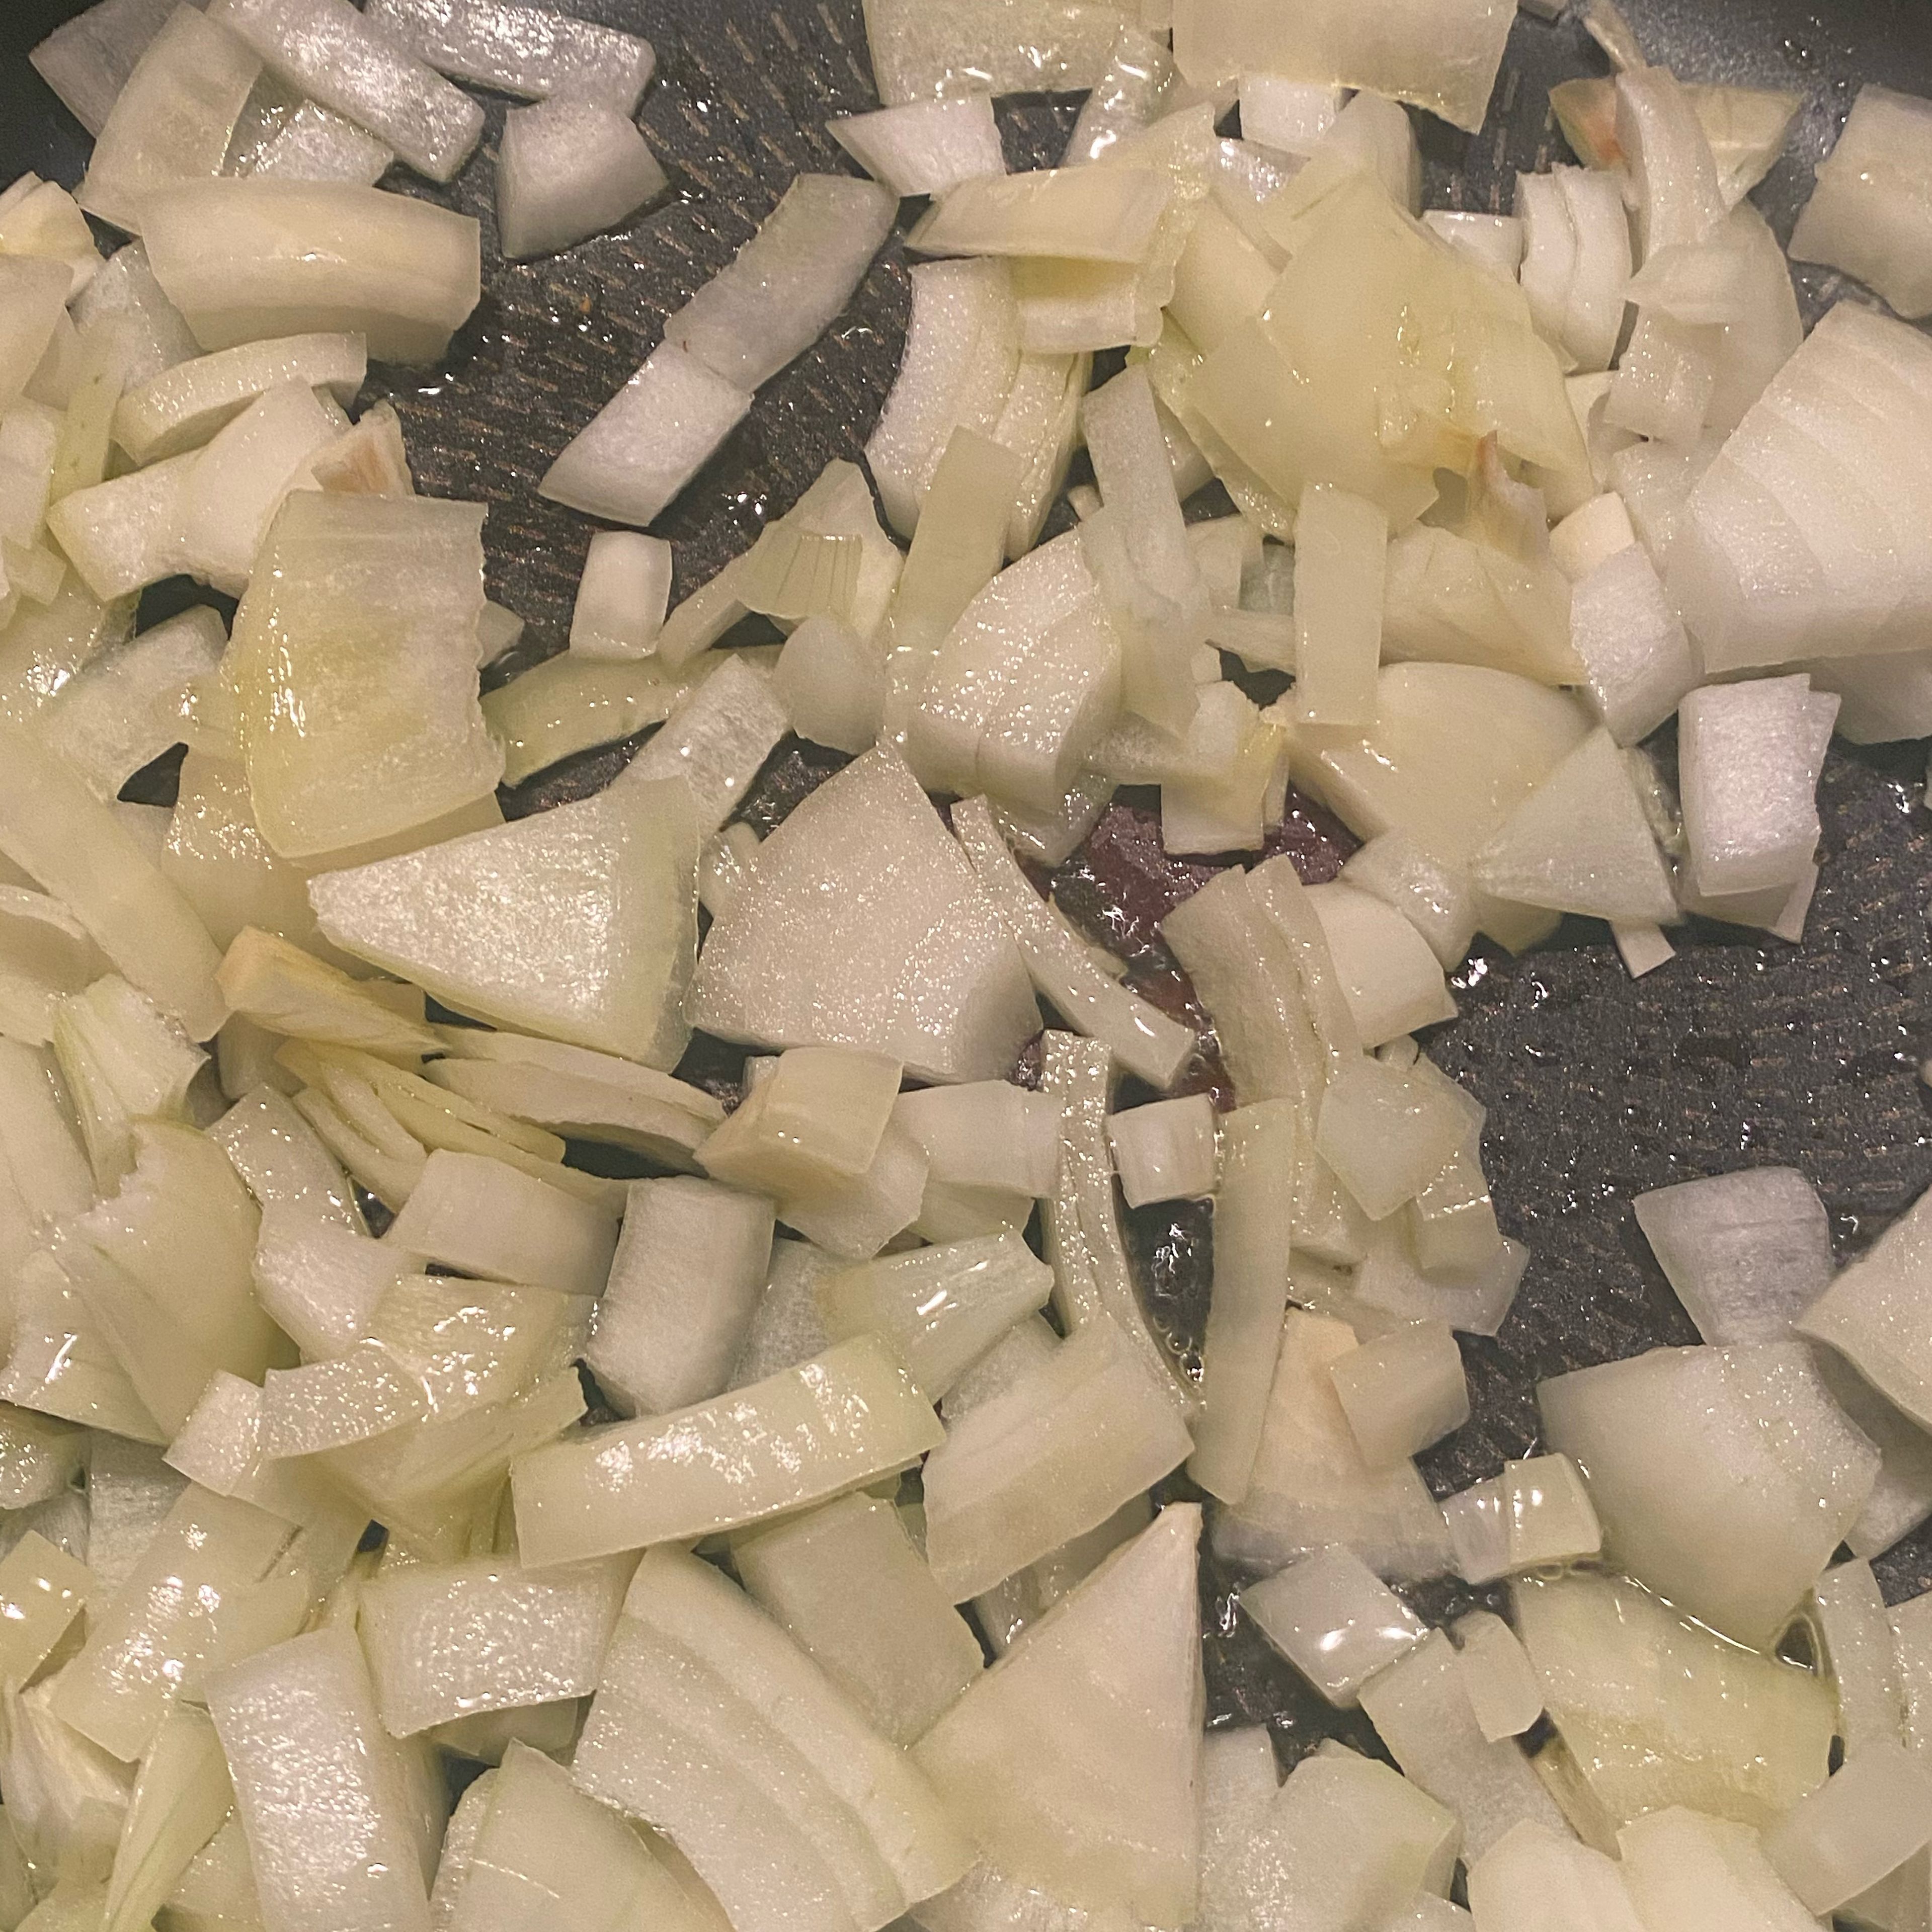 Heat the olive oil in a high-sided pan and sauté the onion